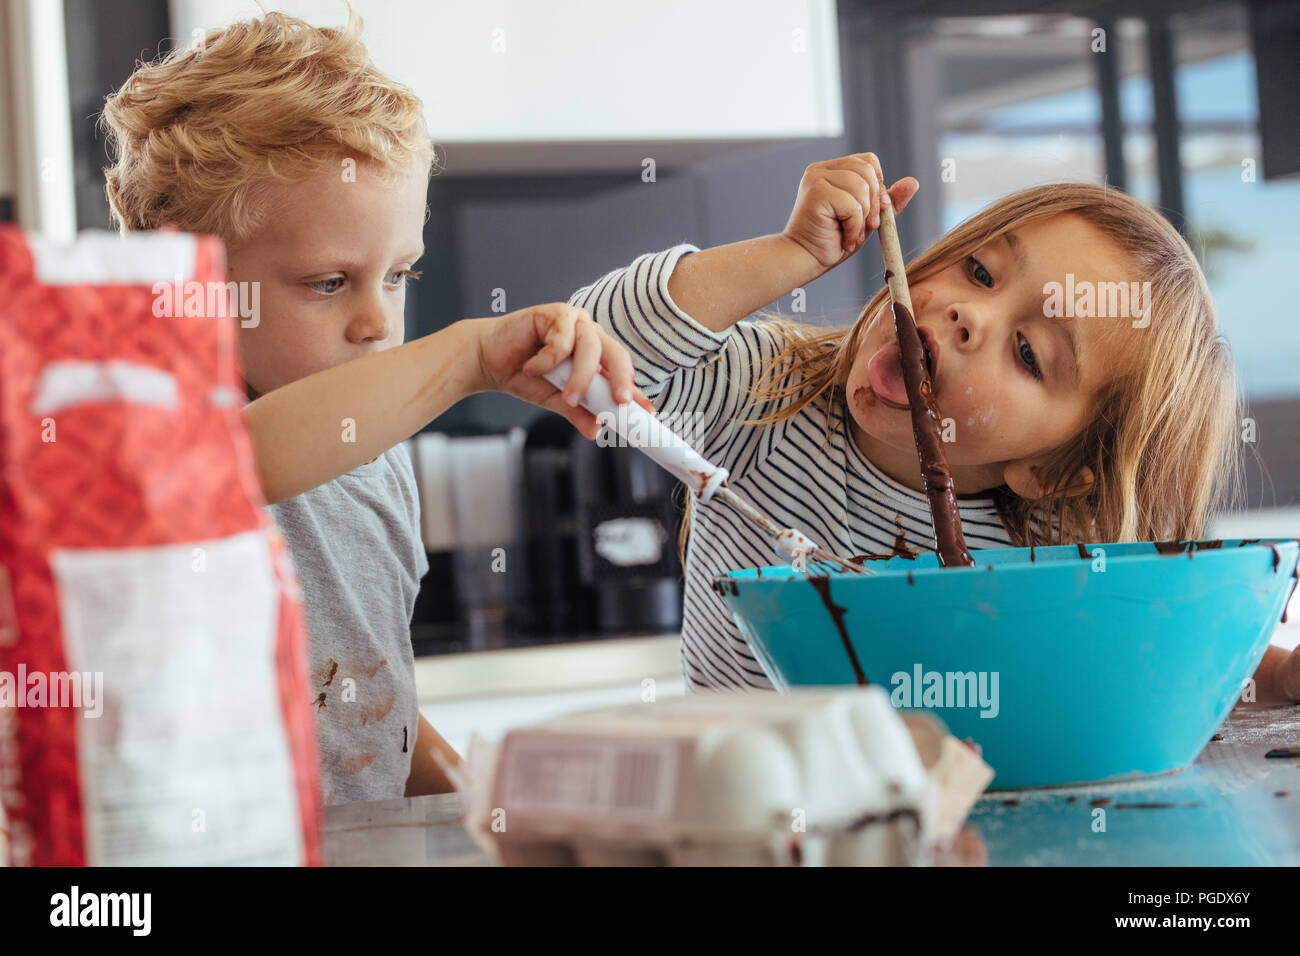 Little Kids Mixing Batter In A Bowl For Baking With Girl Licking A Spoon Children Baking In The Kitchen Stock Photo Alamy